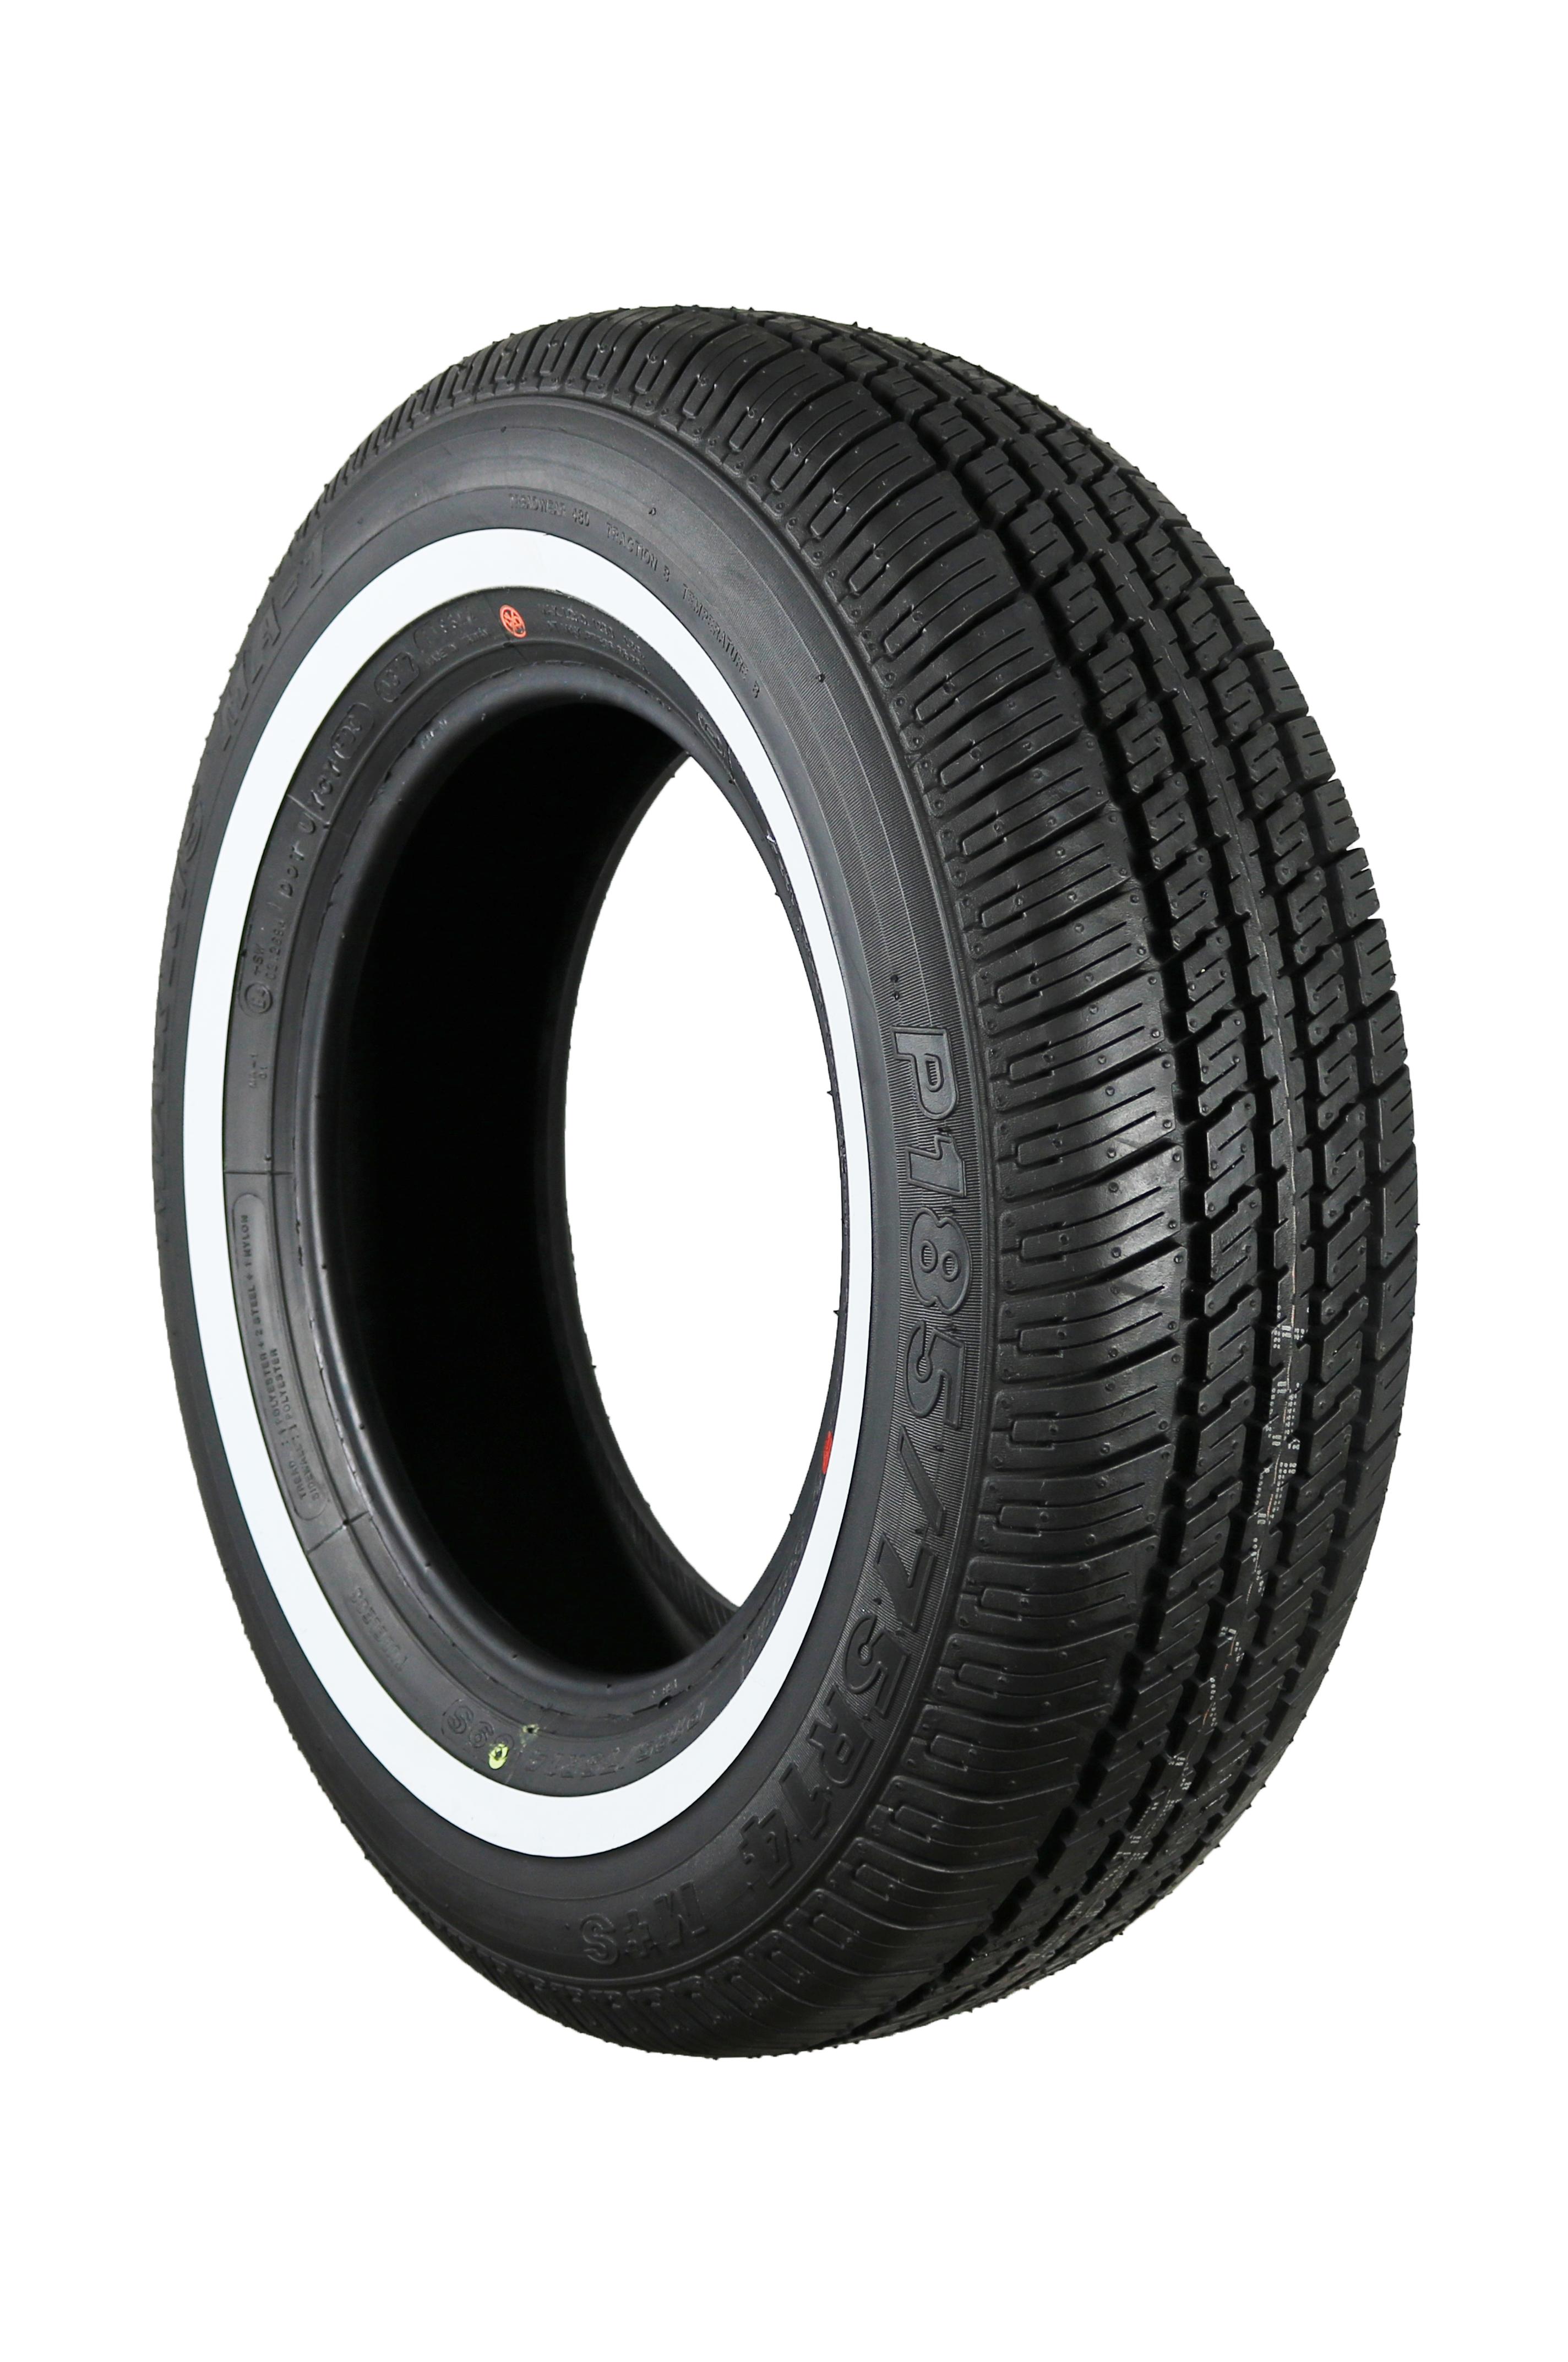 Maxxis MA-1 Classic 89S & | 22mm Vintage Tyres 185/75R14 WSW